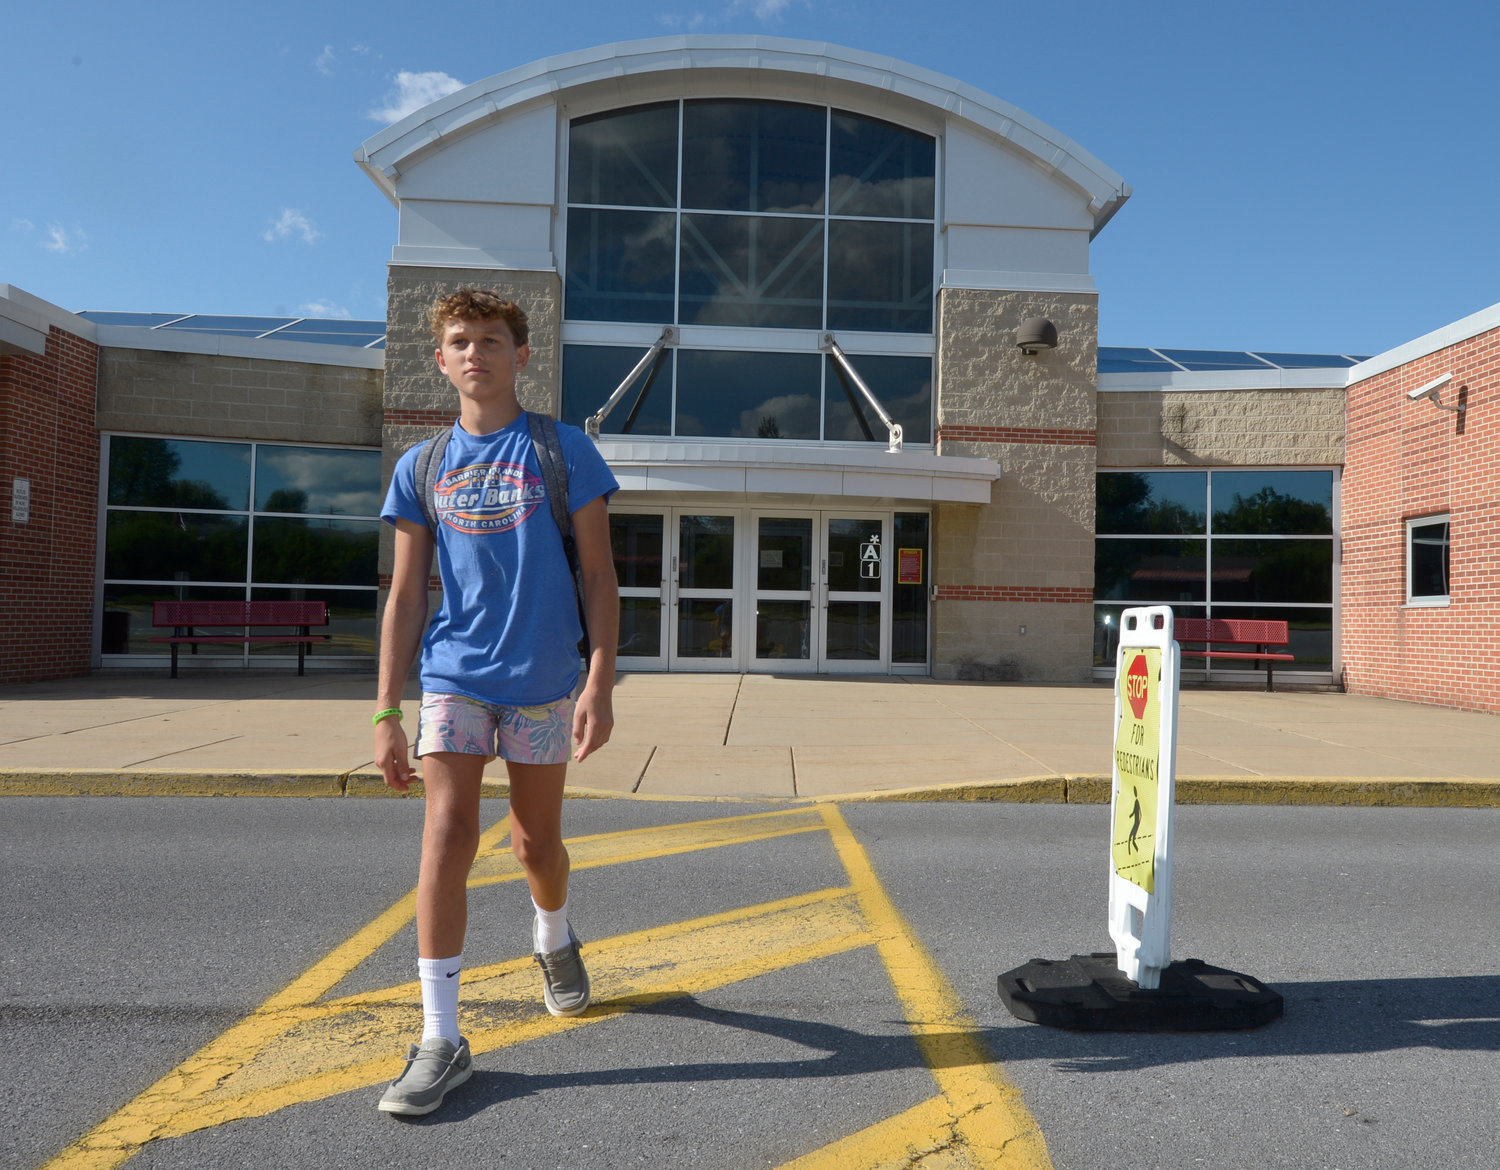 Braylon Price, 13, walks home from Bellefonte Middle School Wednesday, Aug. 31, 2022, in Bellefonte, Pa. The teenager was among more than 45,000 Pennsylvania students whose parents elected to take advantage of a new state pandemic-era law option of holding their child back a year in school. He repeated the sixth grade. (AP Photo/Gary M. Baranec)